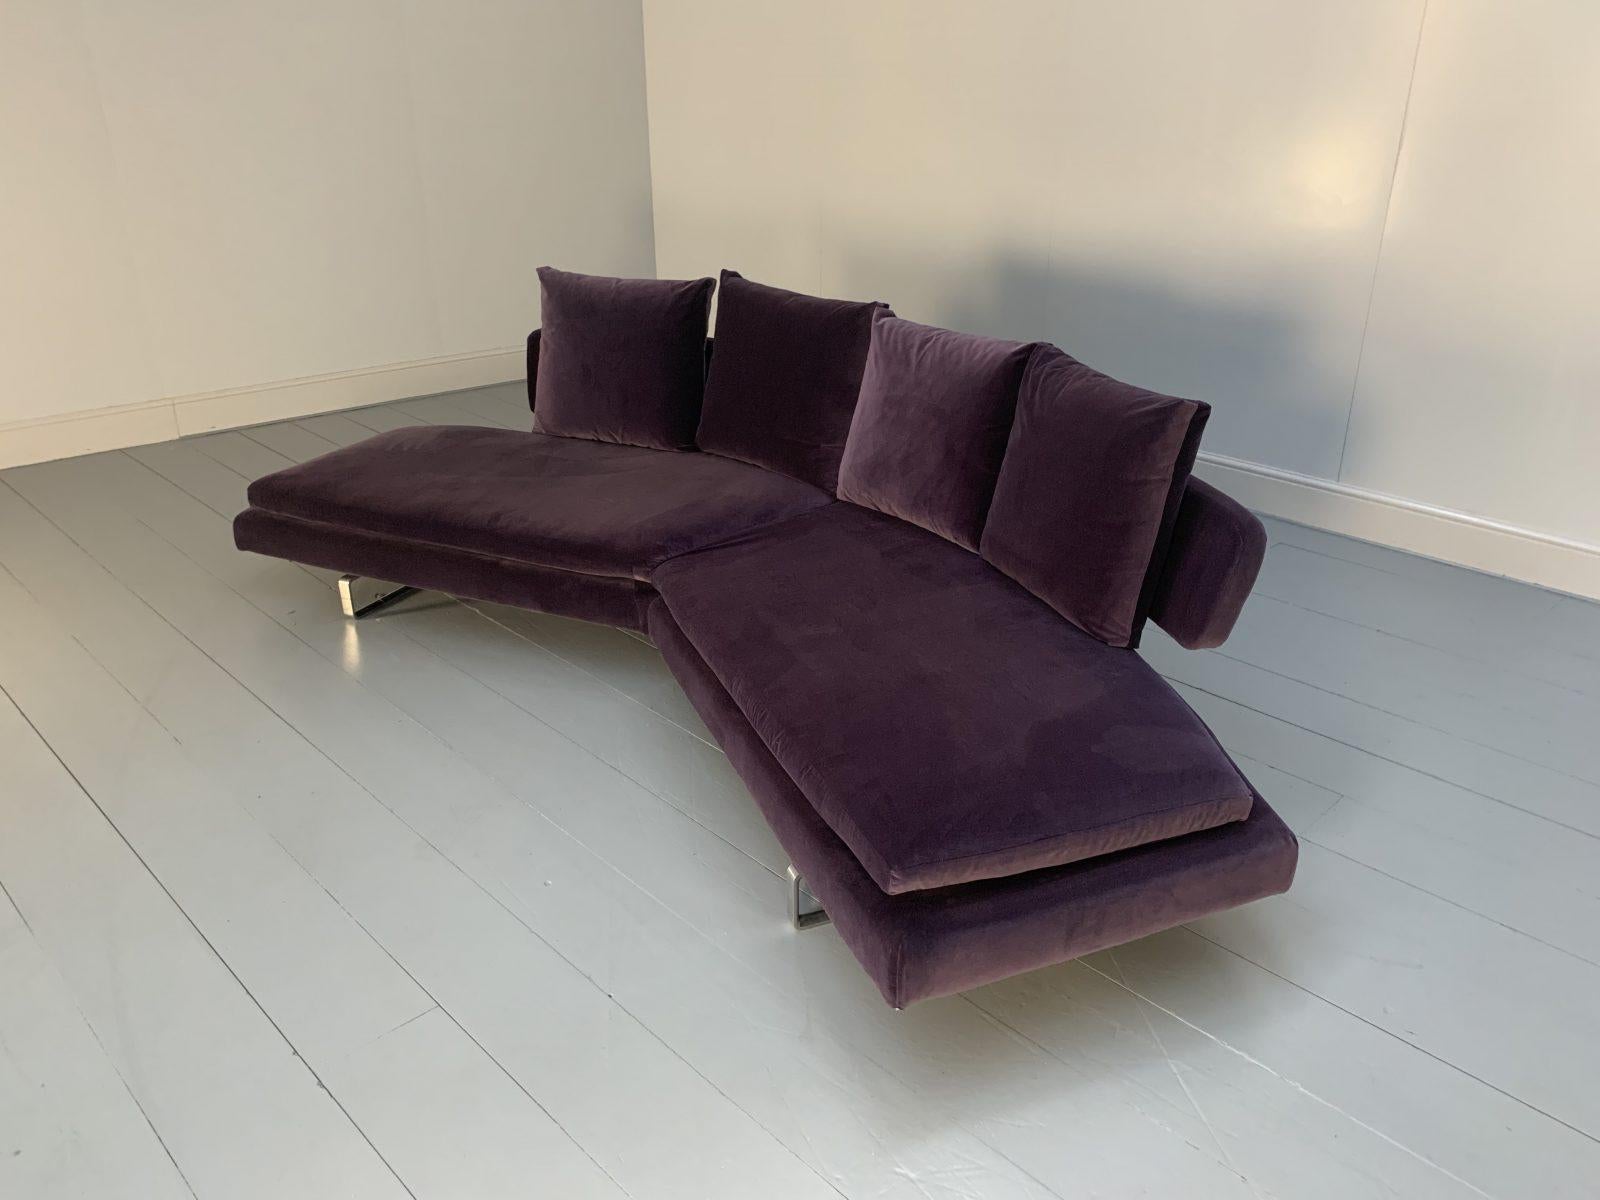 B&B Italia “Arne A252C_1” 4-Seat Curved Sofa in Purple Velvet In Good Condition For Sale In Barrowford, GB